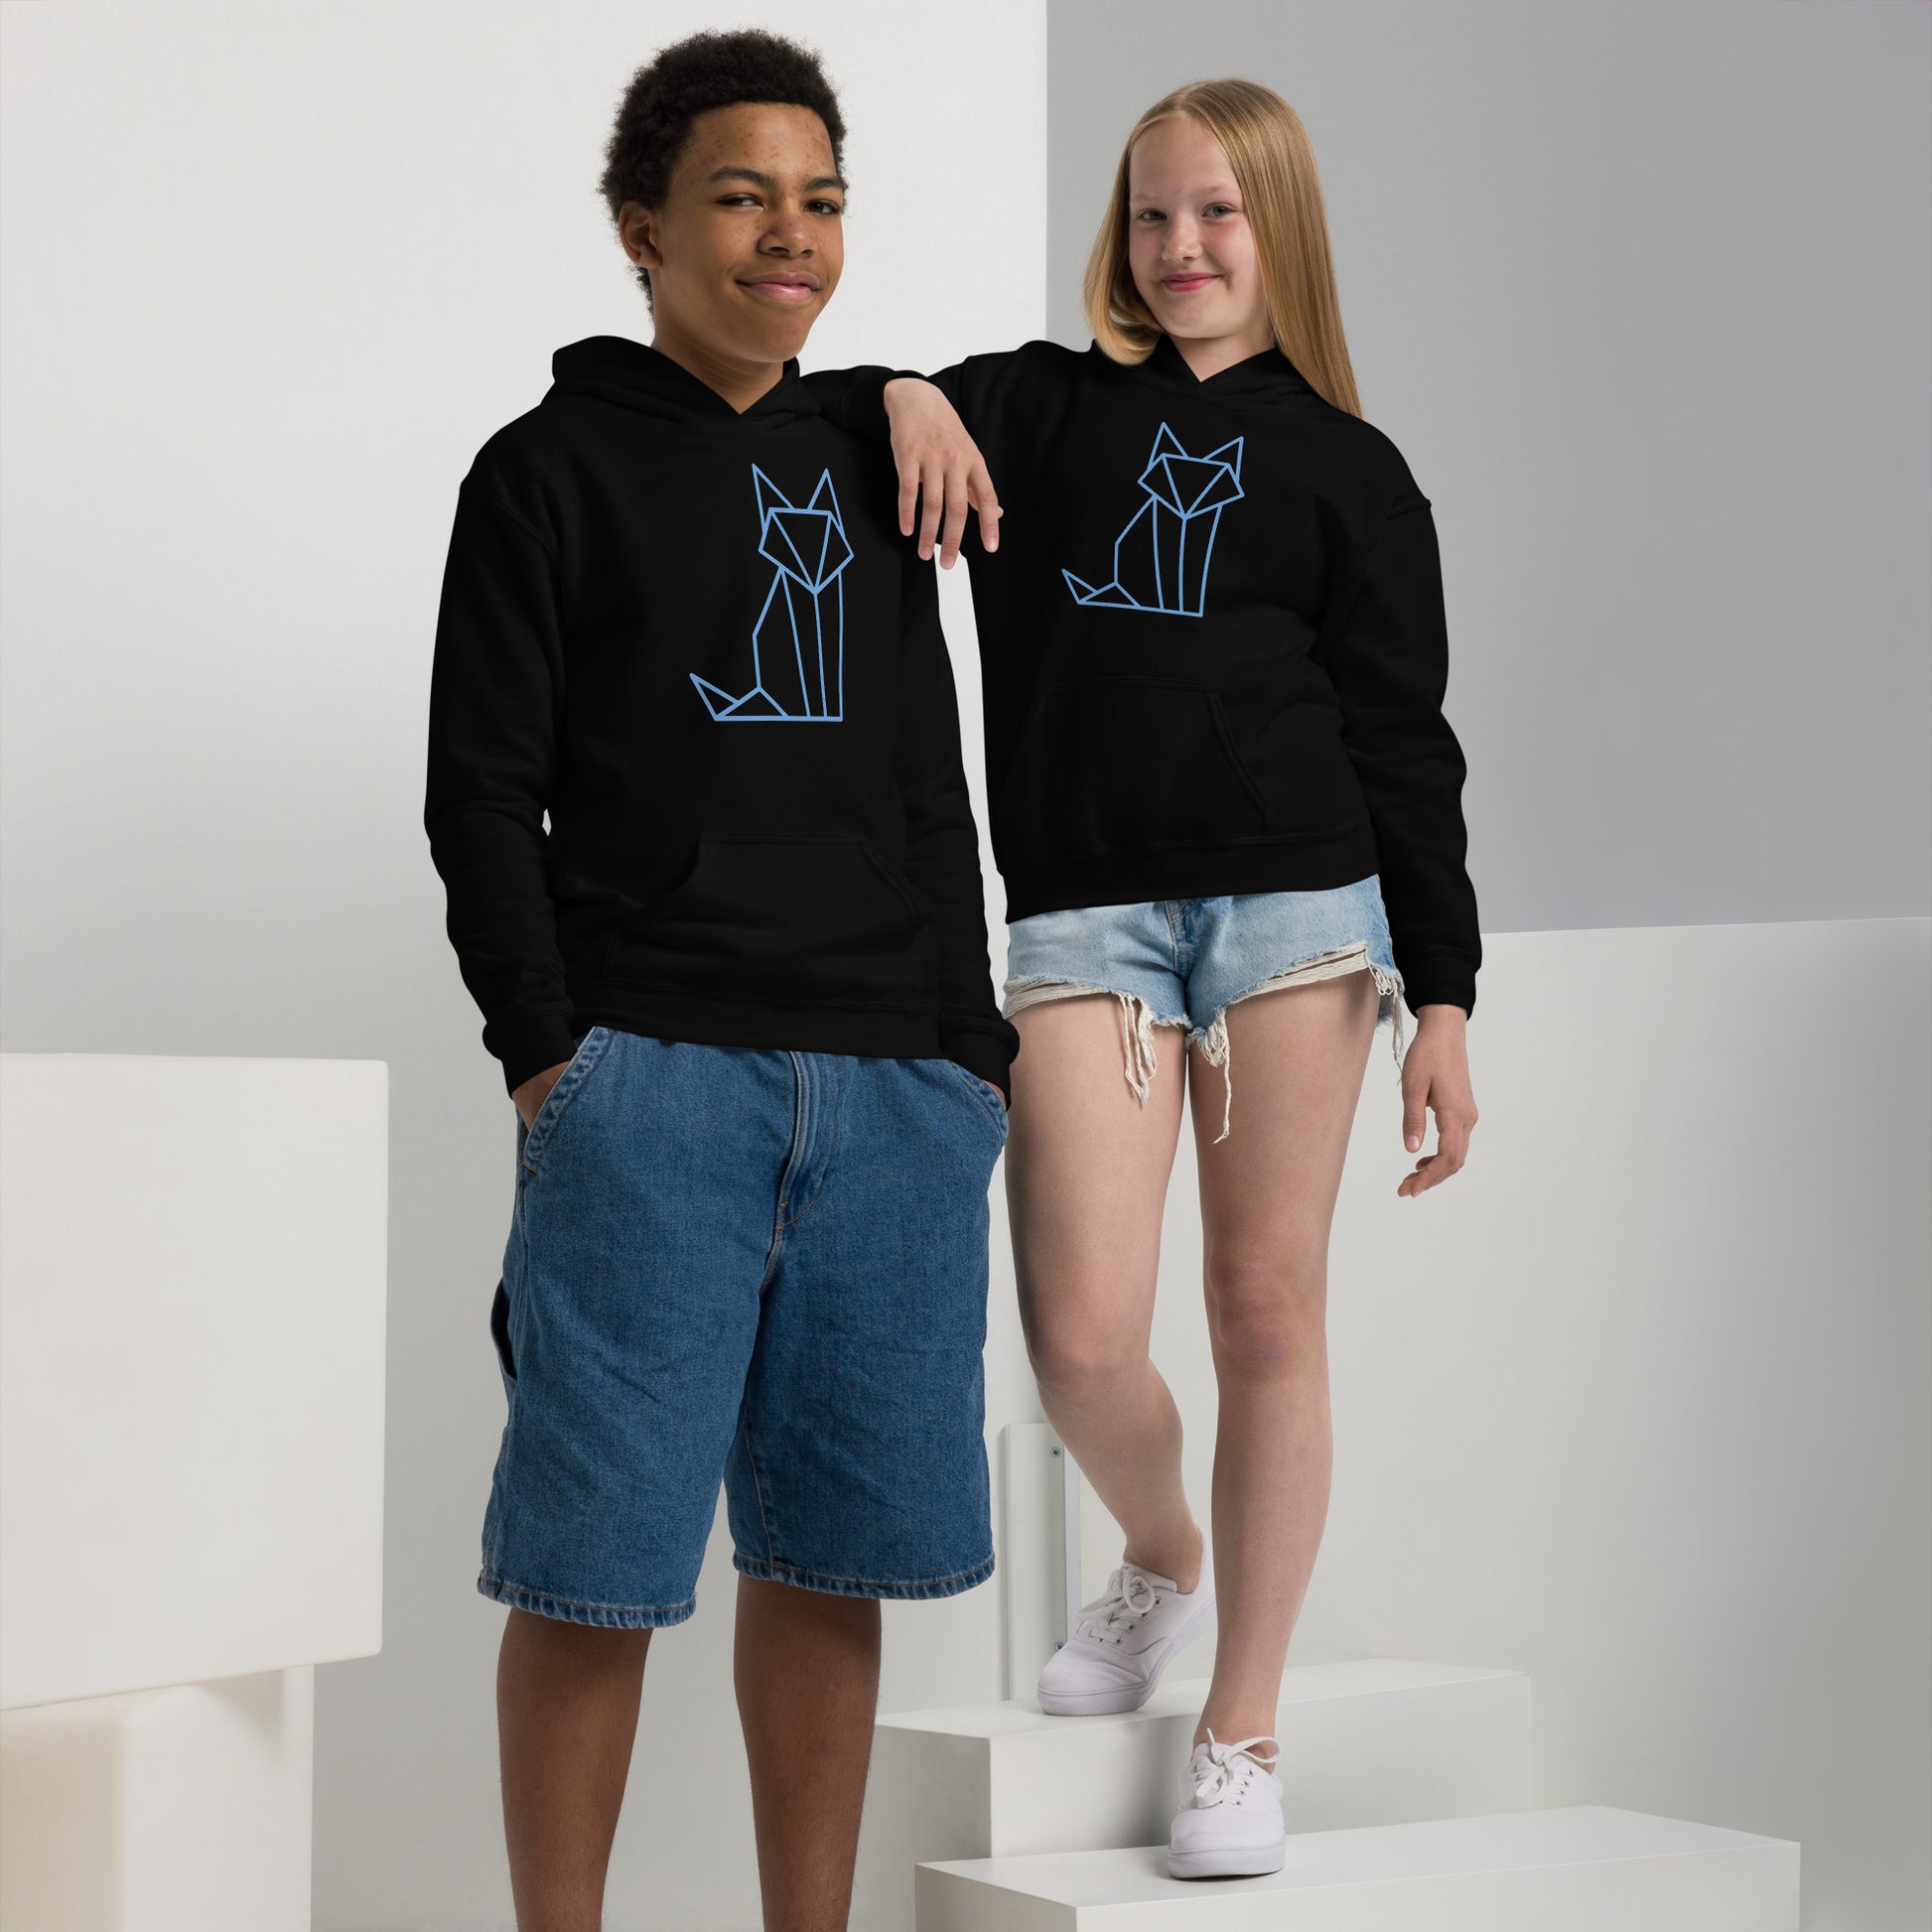 Youth with a black sweatshirt with a print of a fox in blue